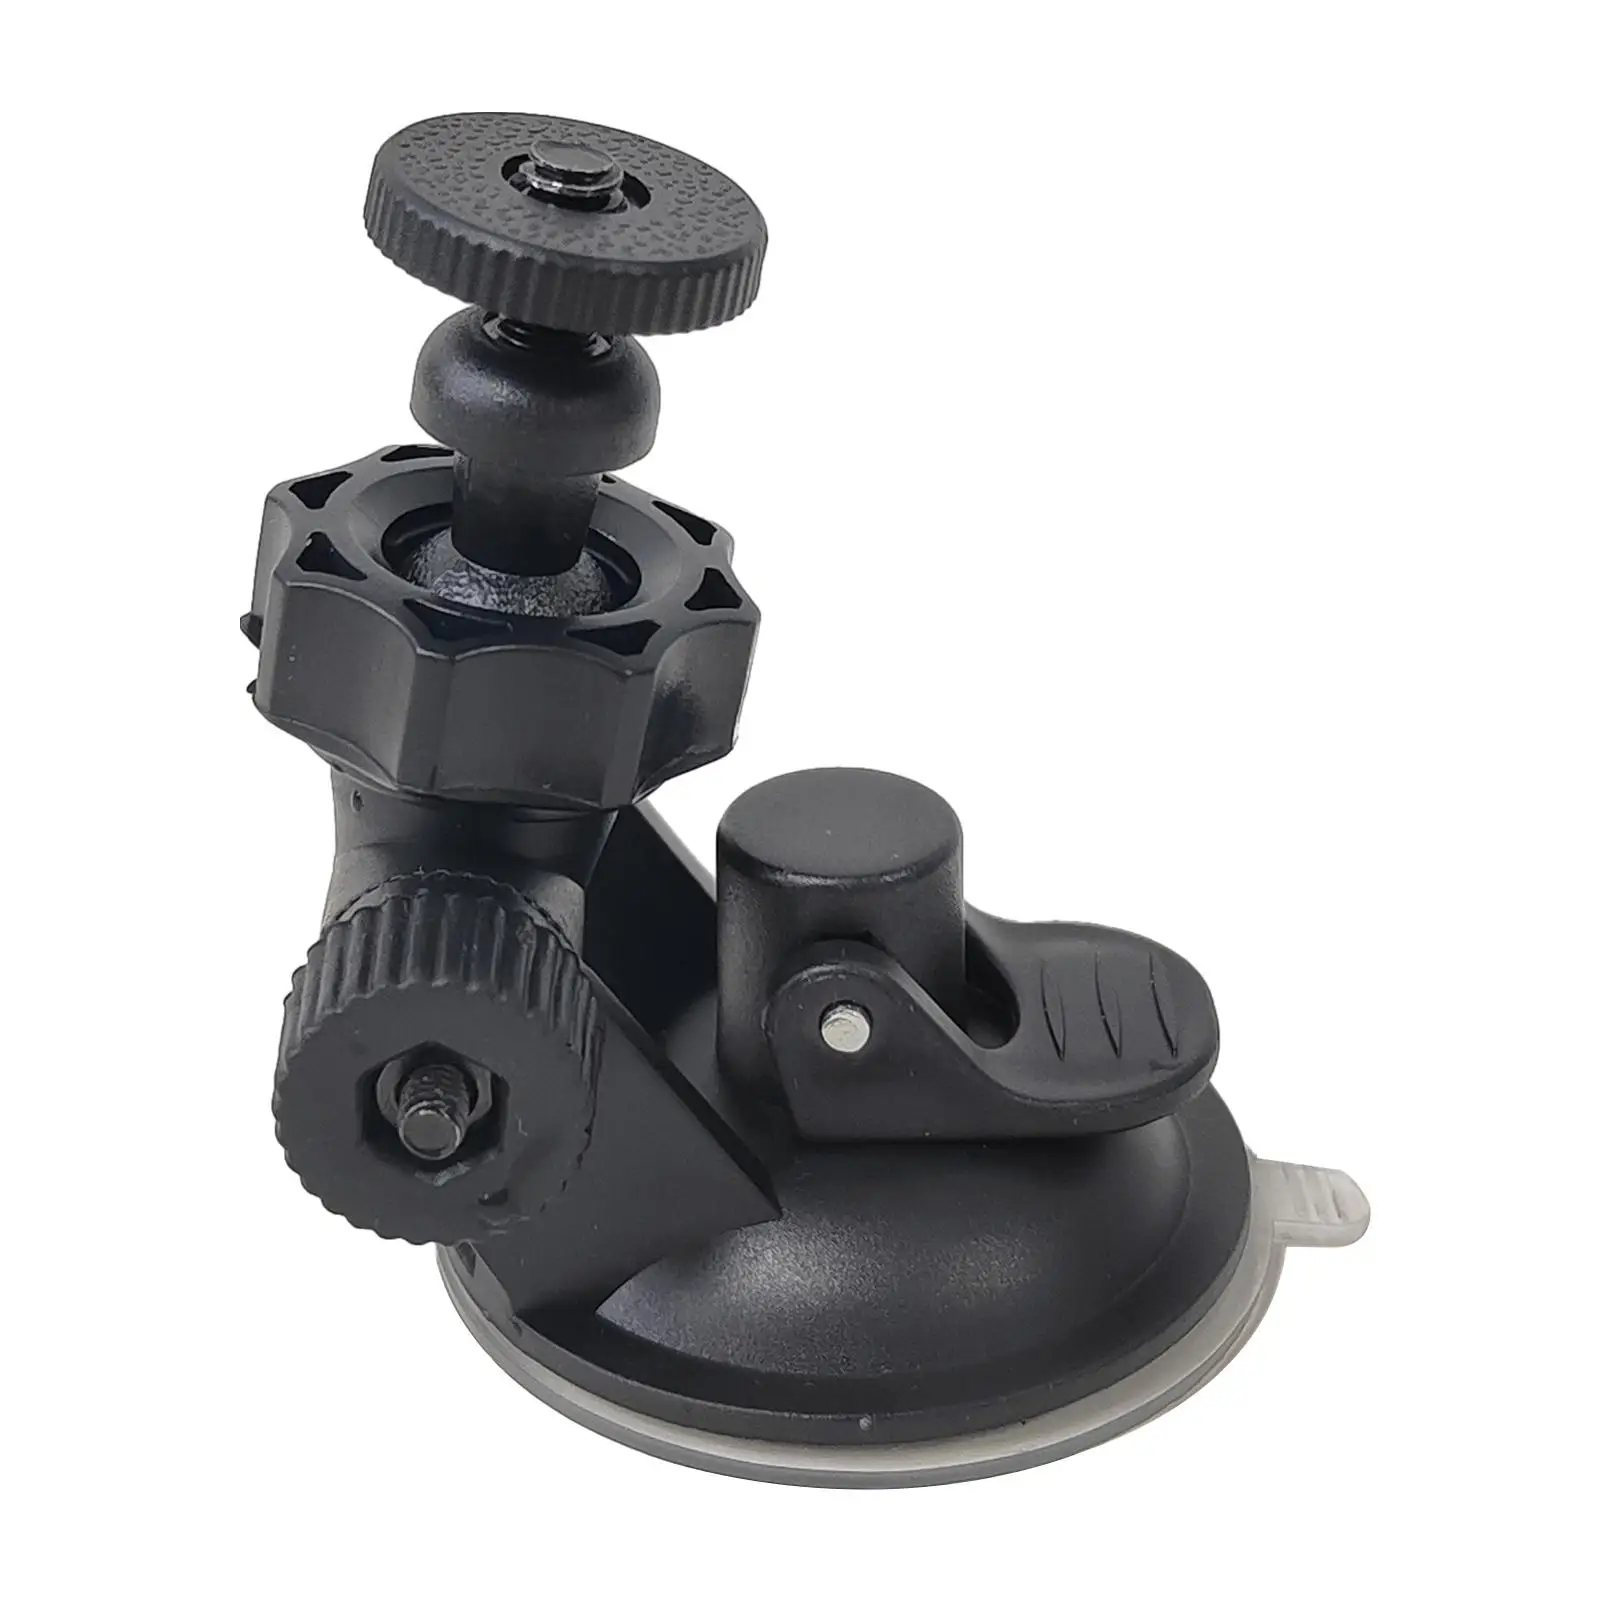 Suction Cup Car Camera Mount Holder Flexible Car Interior Accessories 360 Degree Rotation for Go 3 Sports Cameras Vlogging